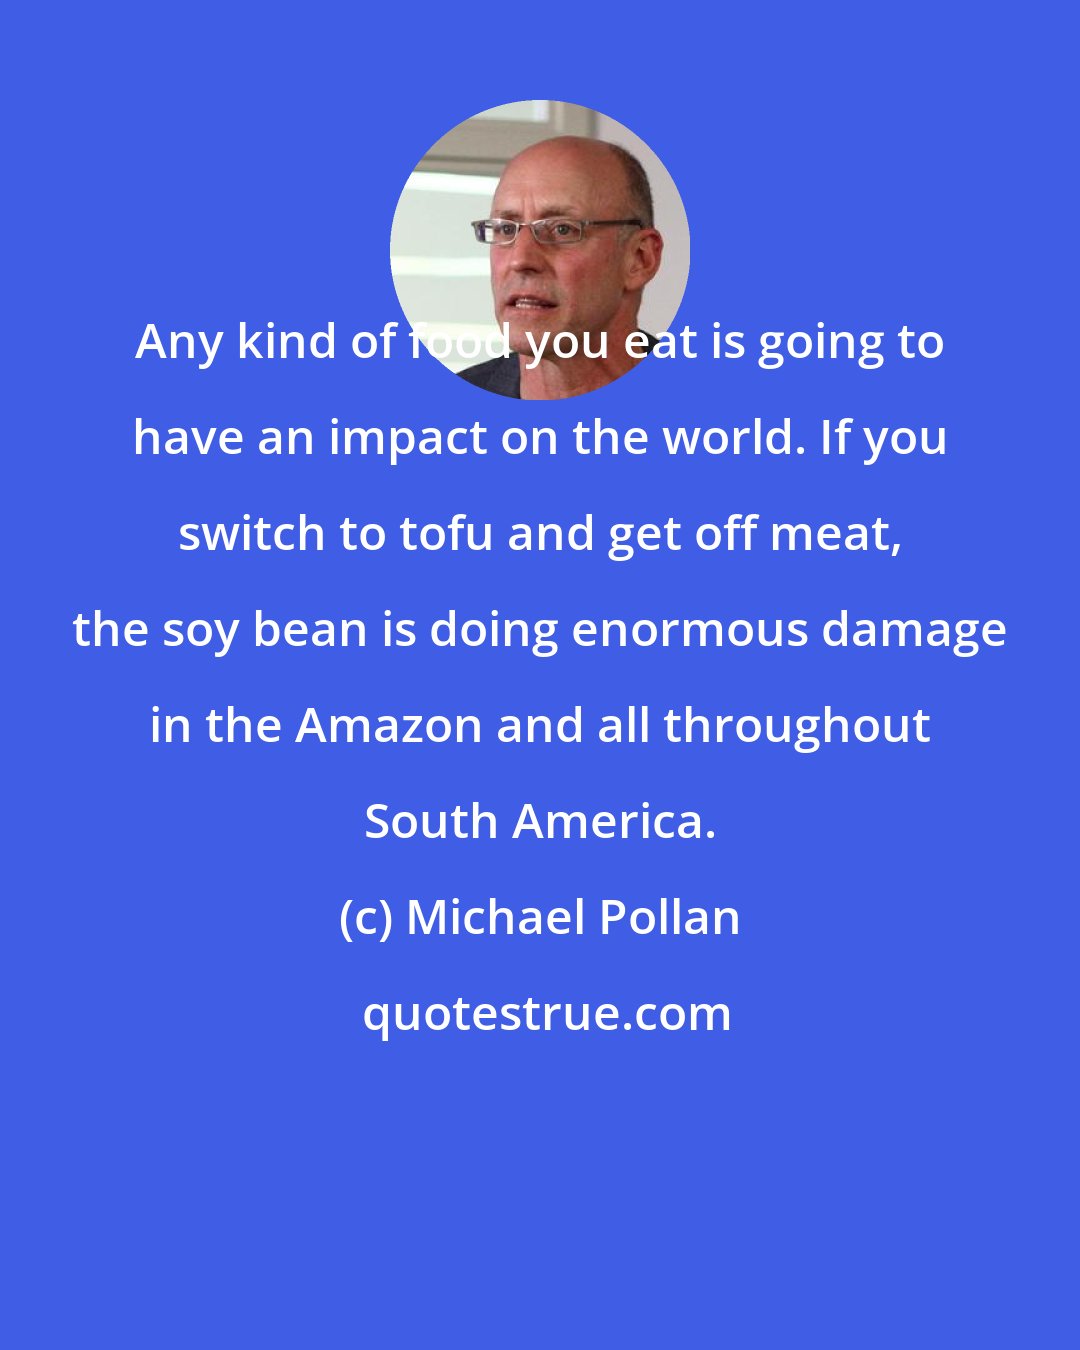 Michael Pollan: Any kind of food you eat is going to have an impact on the world. If you switch to tofu and get off meat, the soy bean is doing enormous damage in the Amazon and all throughout South America.